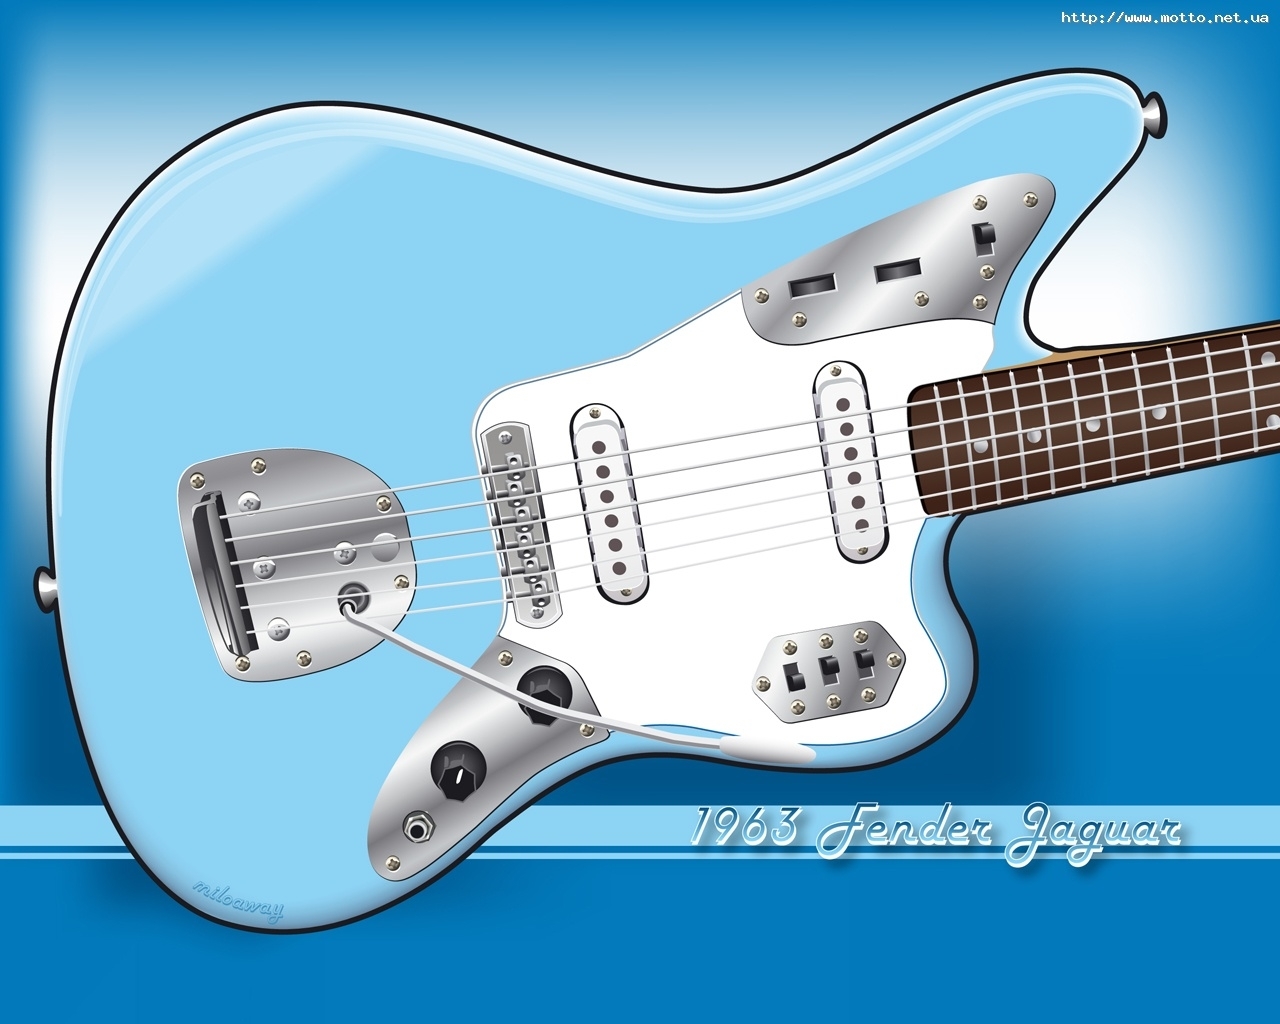 guitars, music, tools, objects wallpapers for tablet